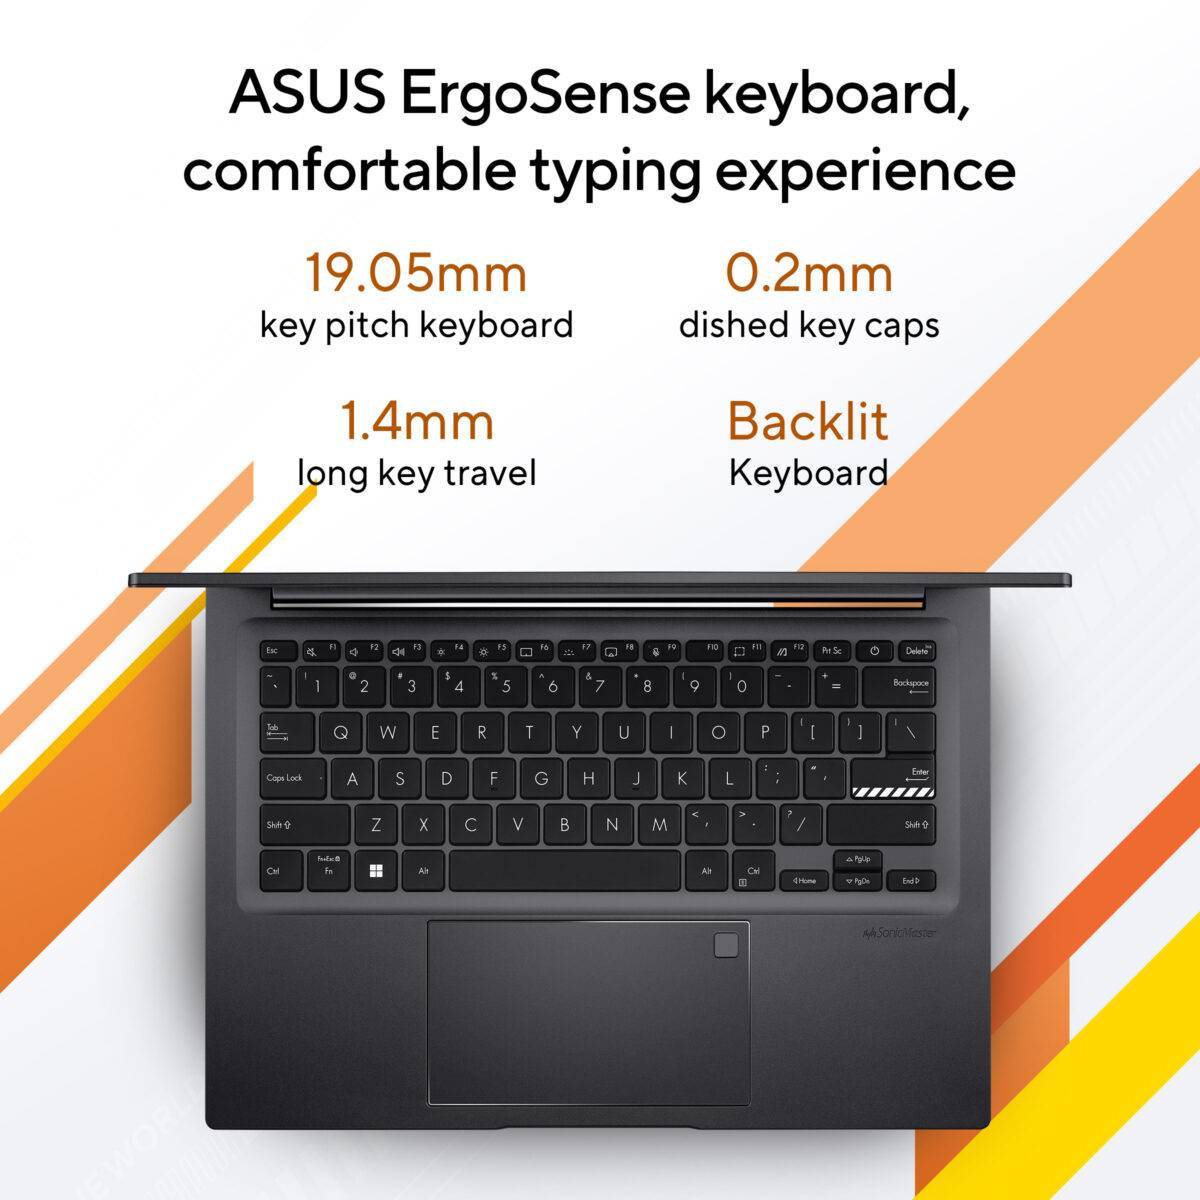 ASUS Vivobook 14 OLED M1405YA-KM741WS / M1405YA-KM541WS ASUS ErgoSense keyboard typing experience and physical webcam shield for instant privacy.